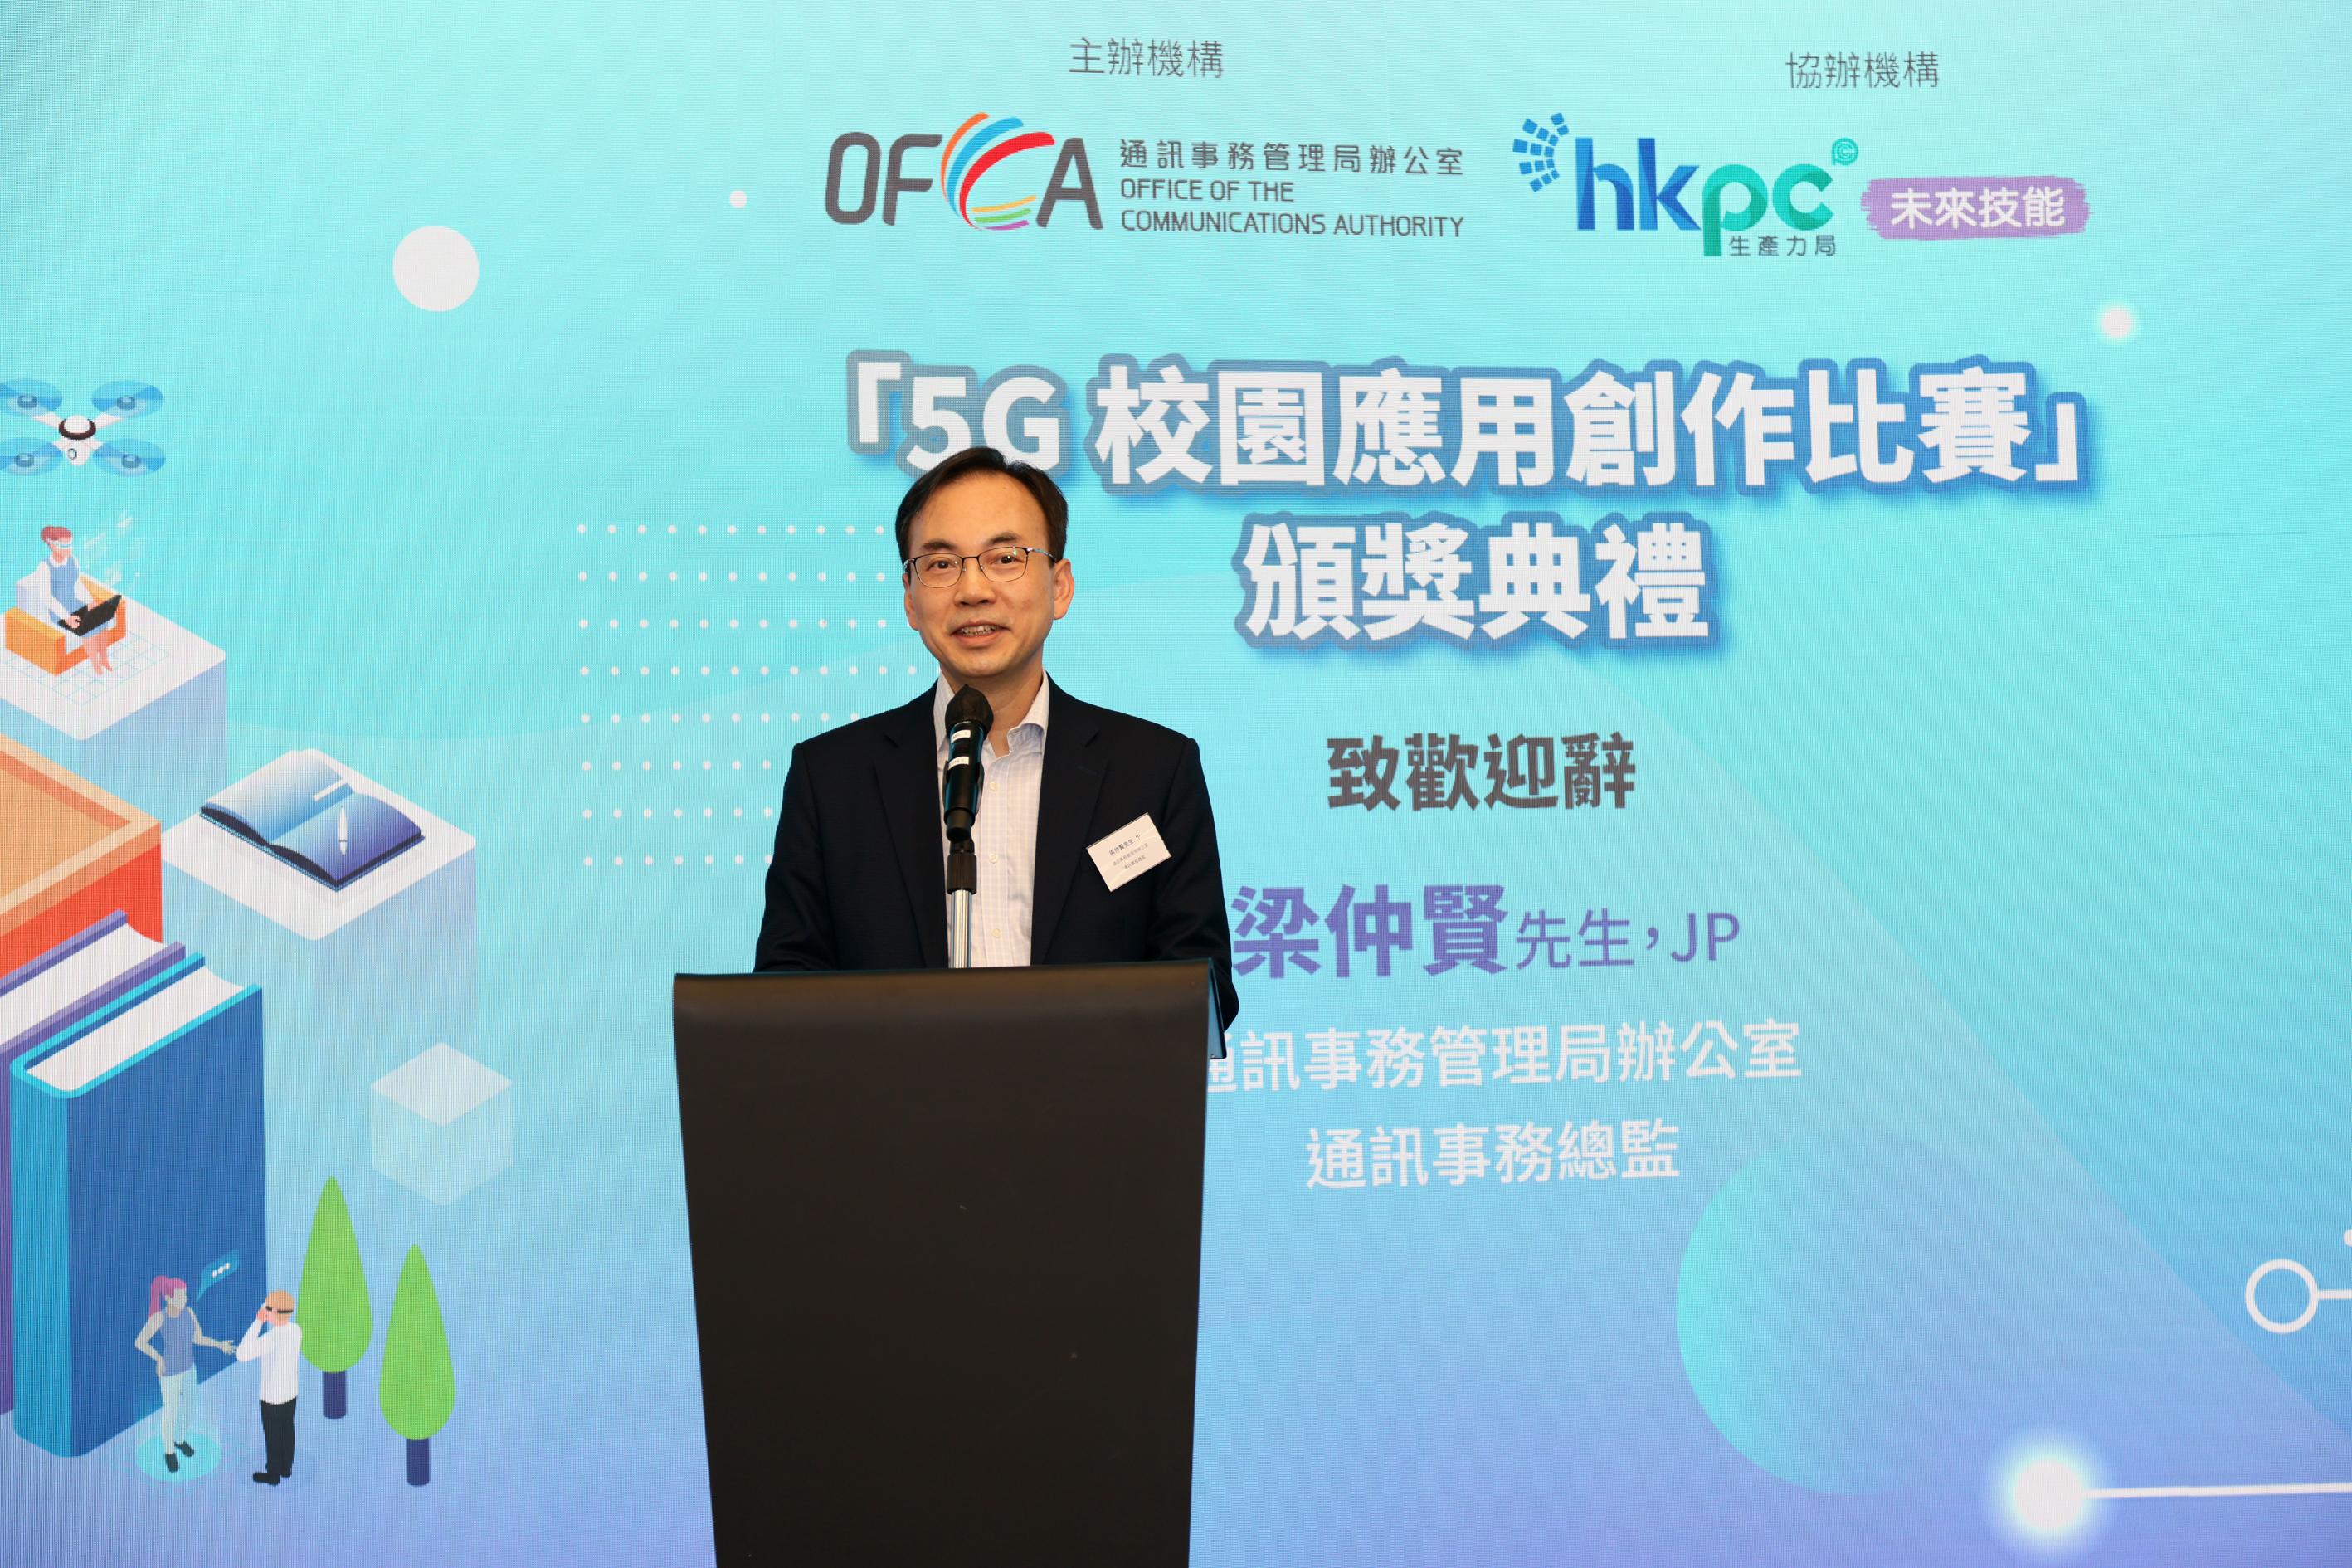 The Office of the Communications Authority held today (December 9) the Award Presentation Ceremony of the "5G Campus Application Competition". Photo shows the Director-General of Communications, Mr Chaucer Leung, delivering a speech at the Award Presentation Ceremony.